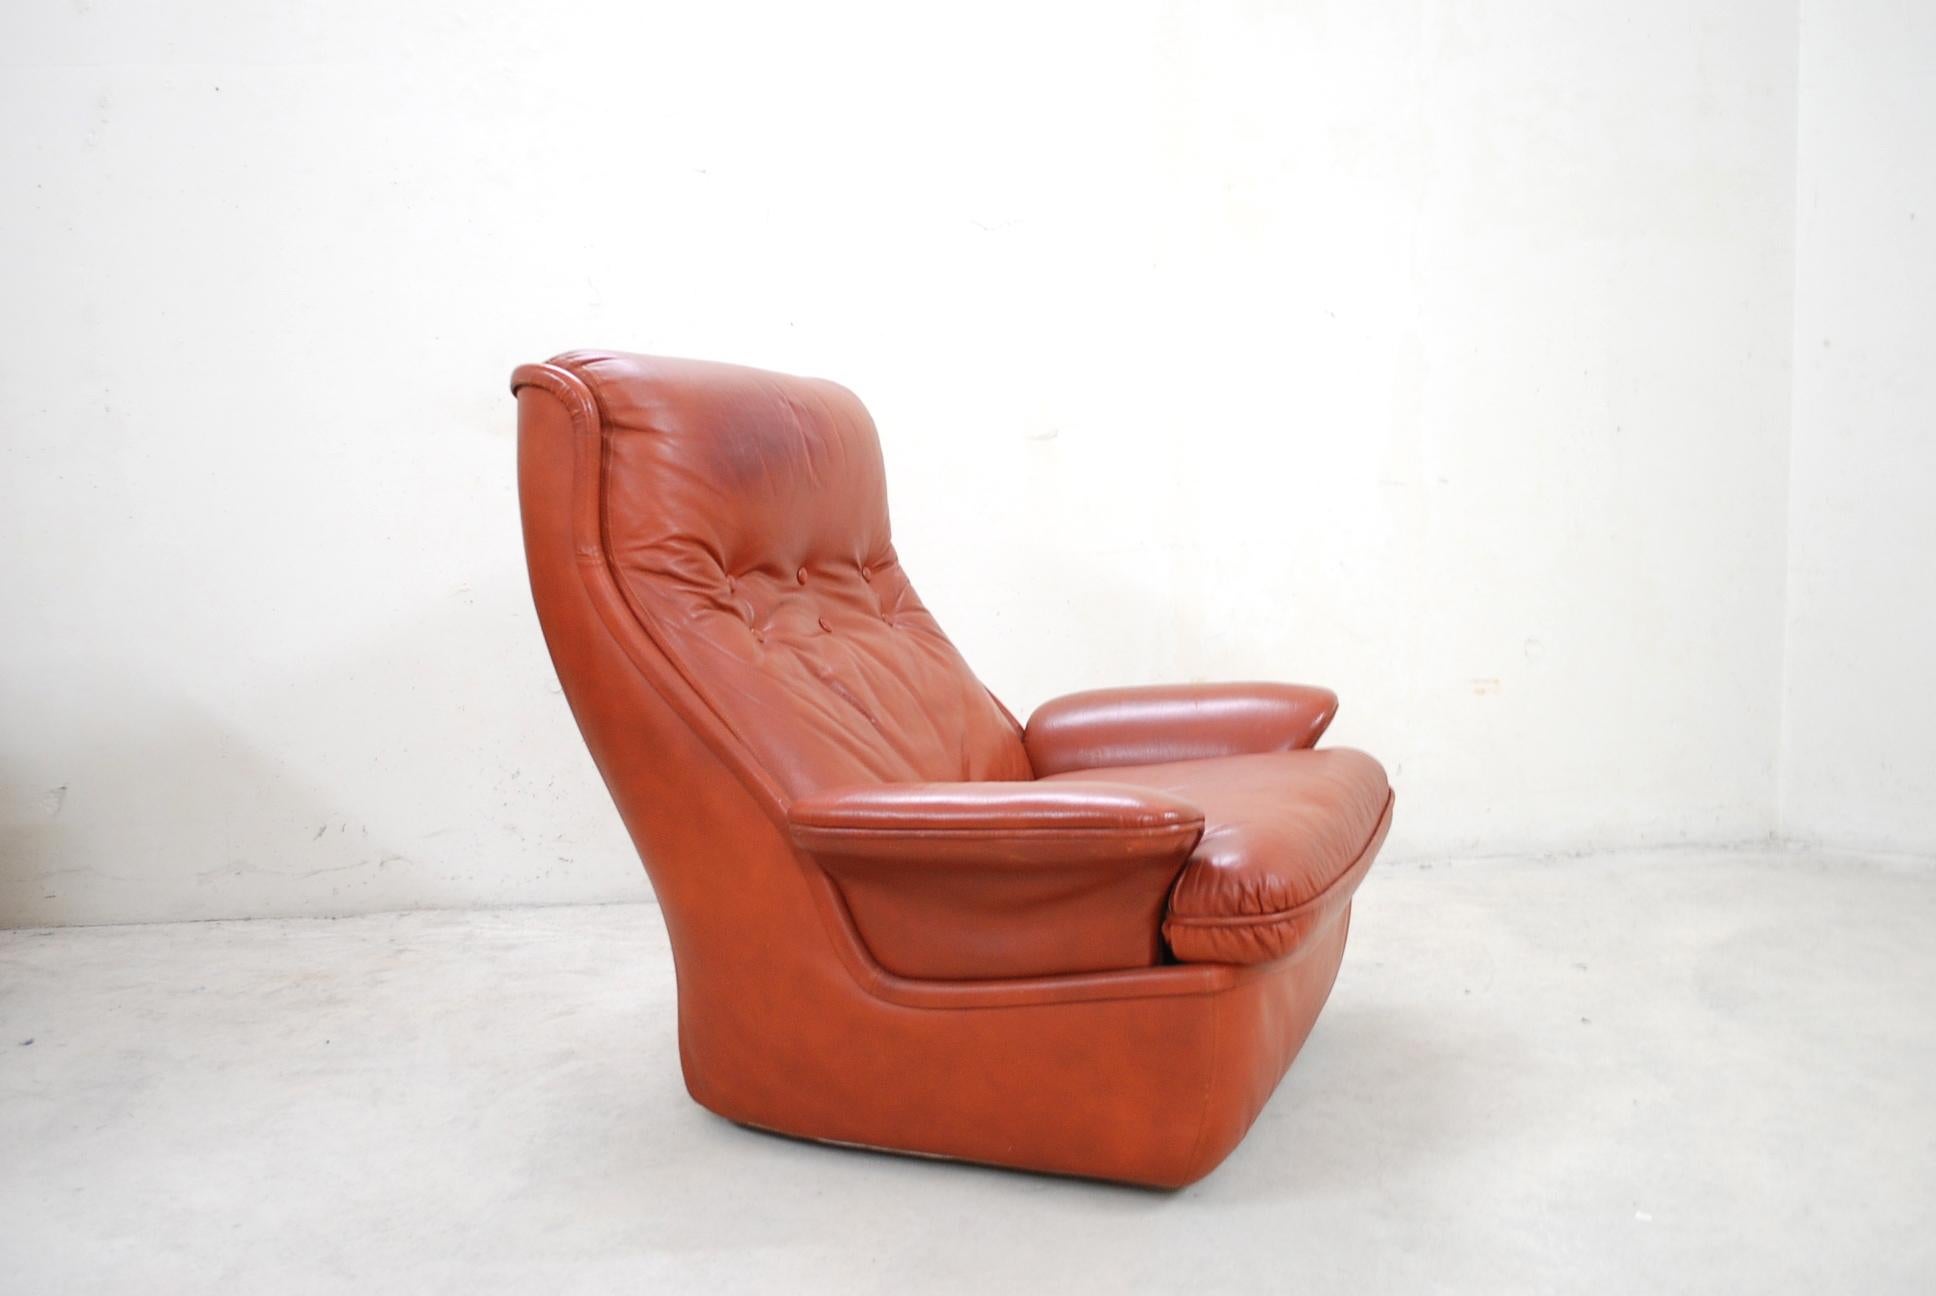 Lounge chair from the 1970s of the Space Age Ära
Manufactured is unknown
Ox red aniline leather and fibreglass frame
4 small wheels on the base.

Dimensions:
Armchair:
Width 95 cm
Depth 95 cm
Height 92 cm
Seat height 39 cm.

 